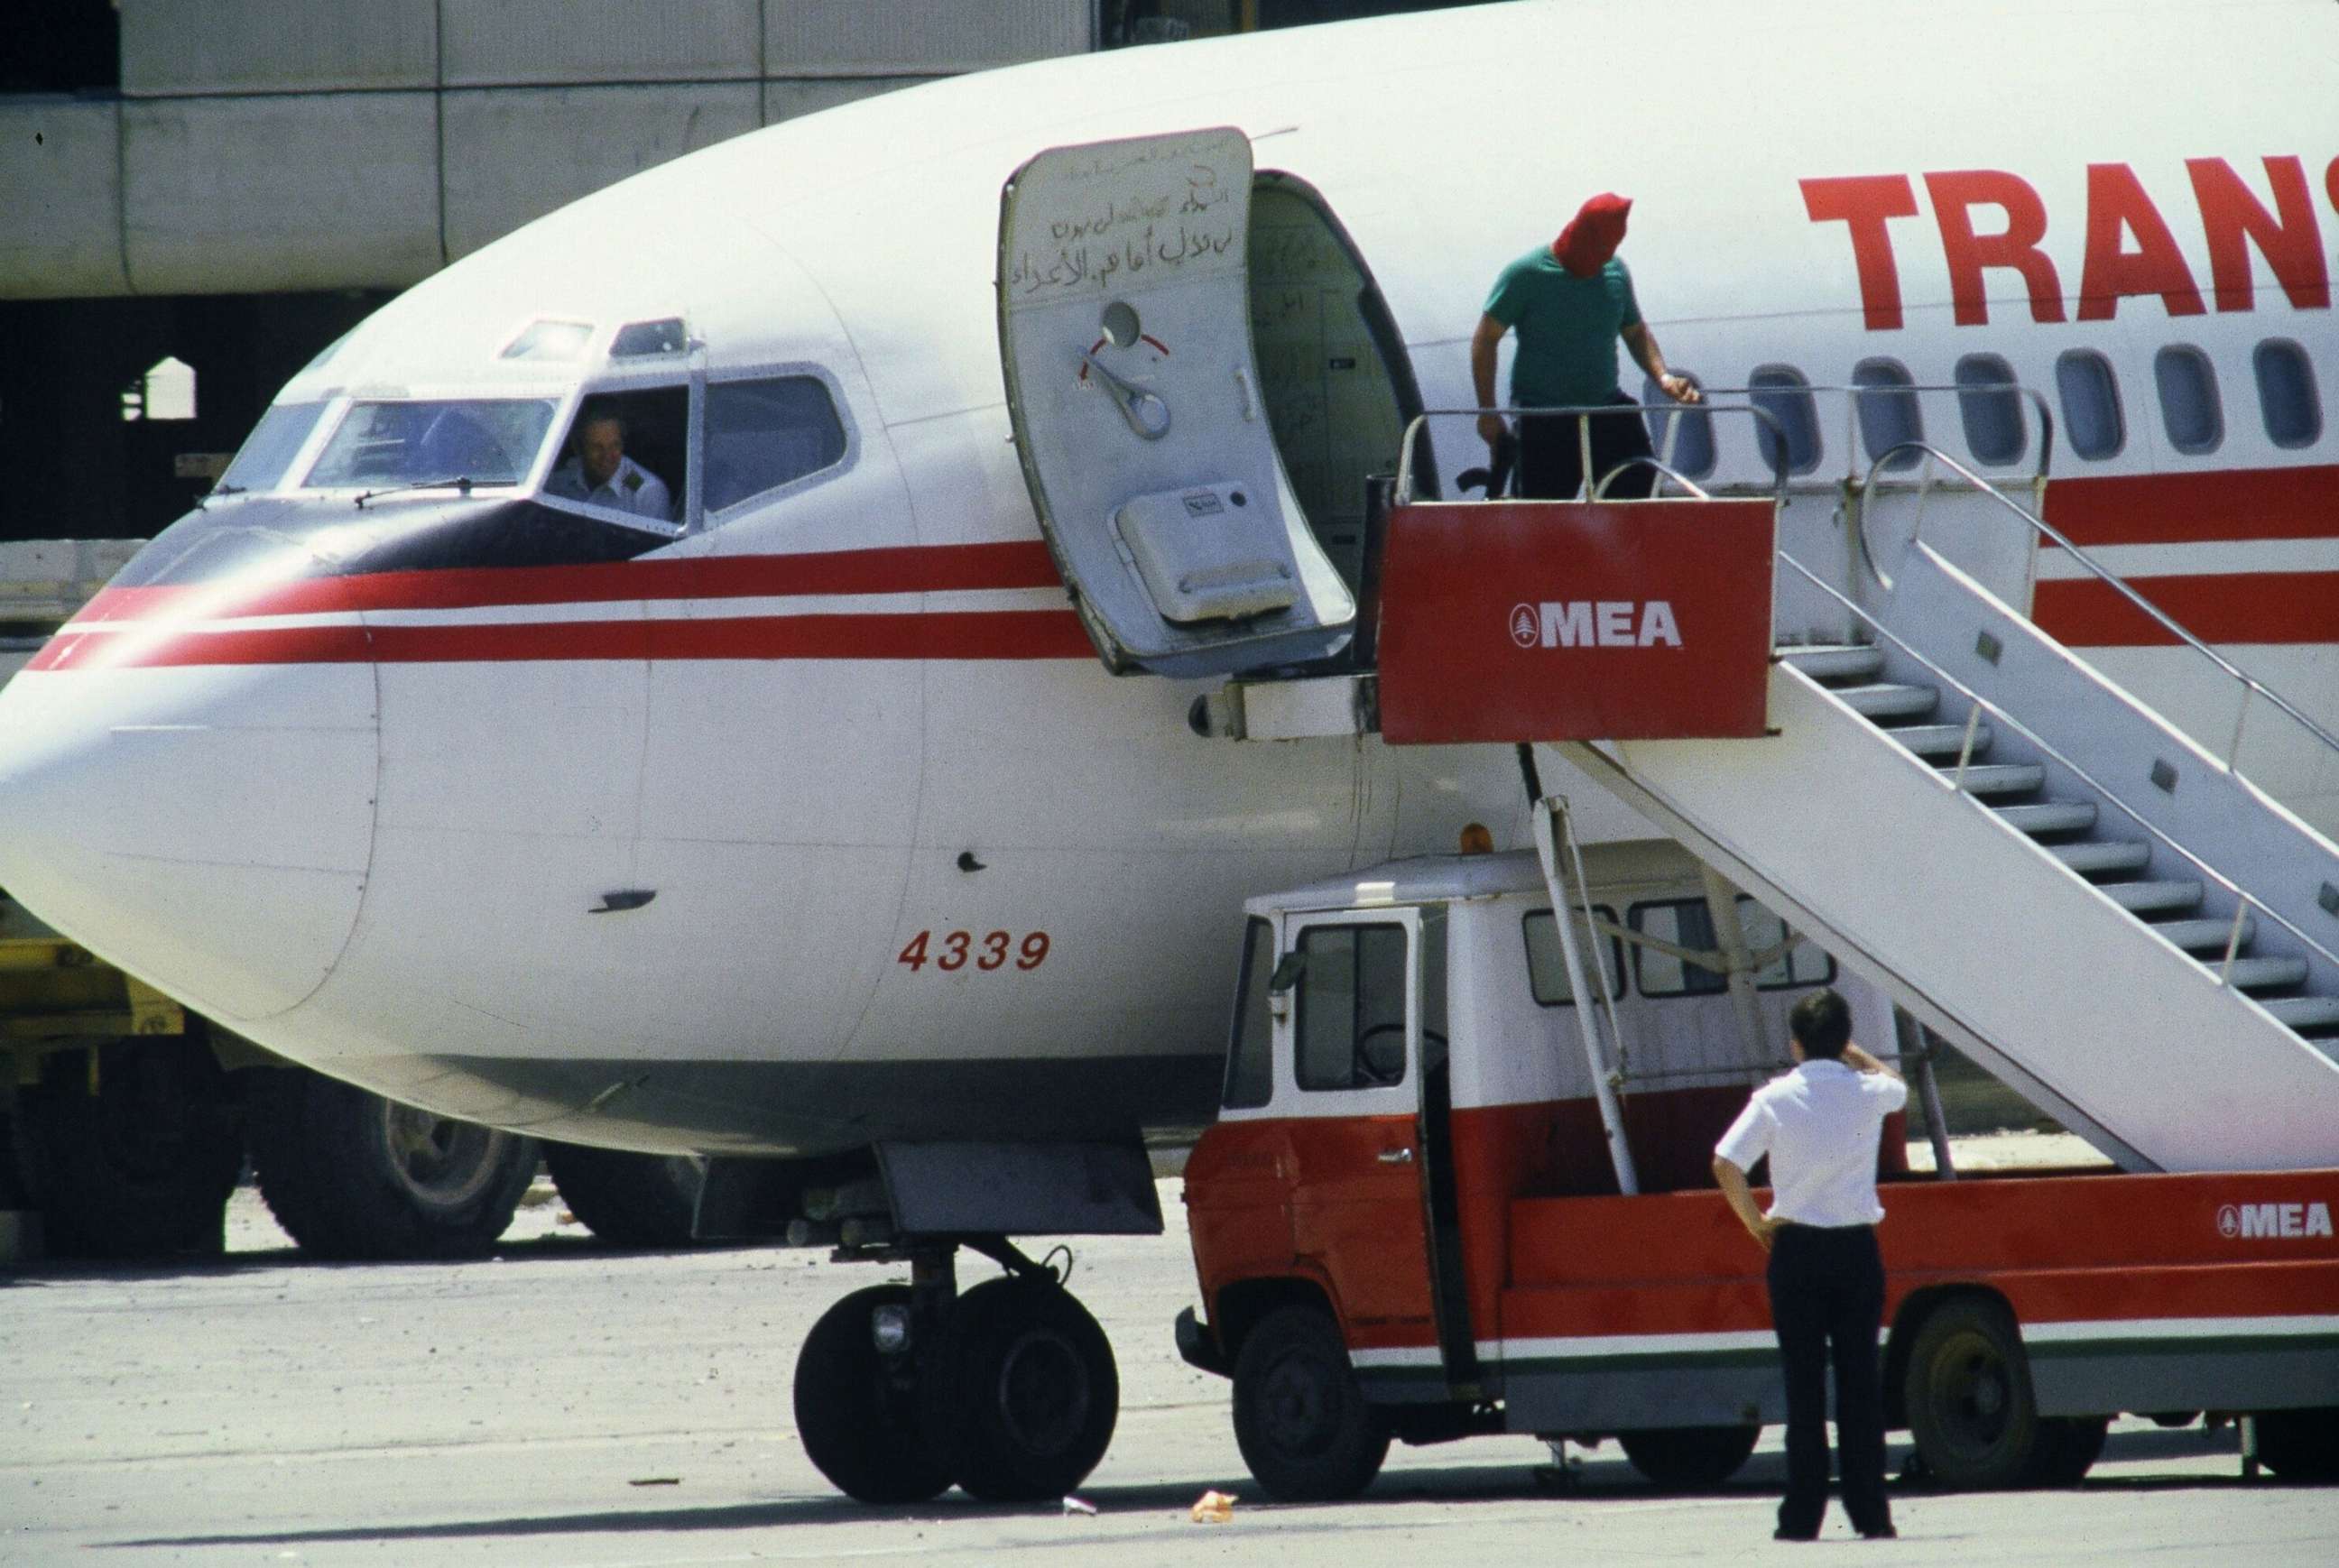 PHOTO: In this file photo taken on June 29, 1985, TWA Boeing 727 captain John L. Testrake from Richmond, Missouri, emerges from the cockpit of his hijacked airliner at Beirut airport while a Shiite masked gunman holding a machine-gun leaves the plane.